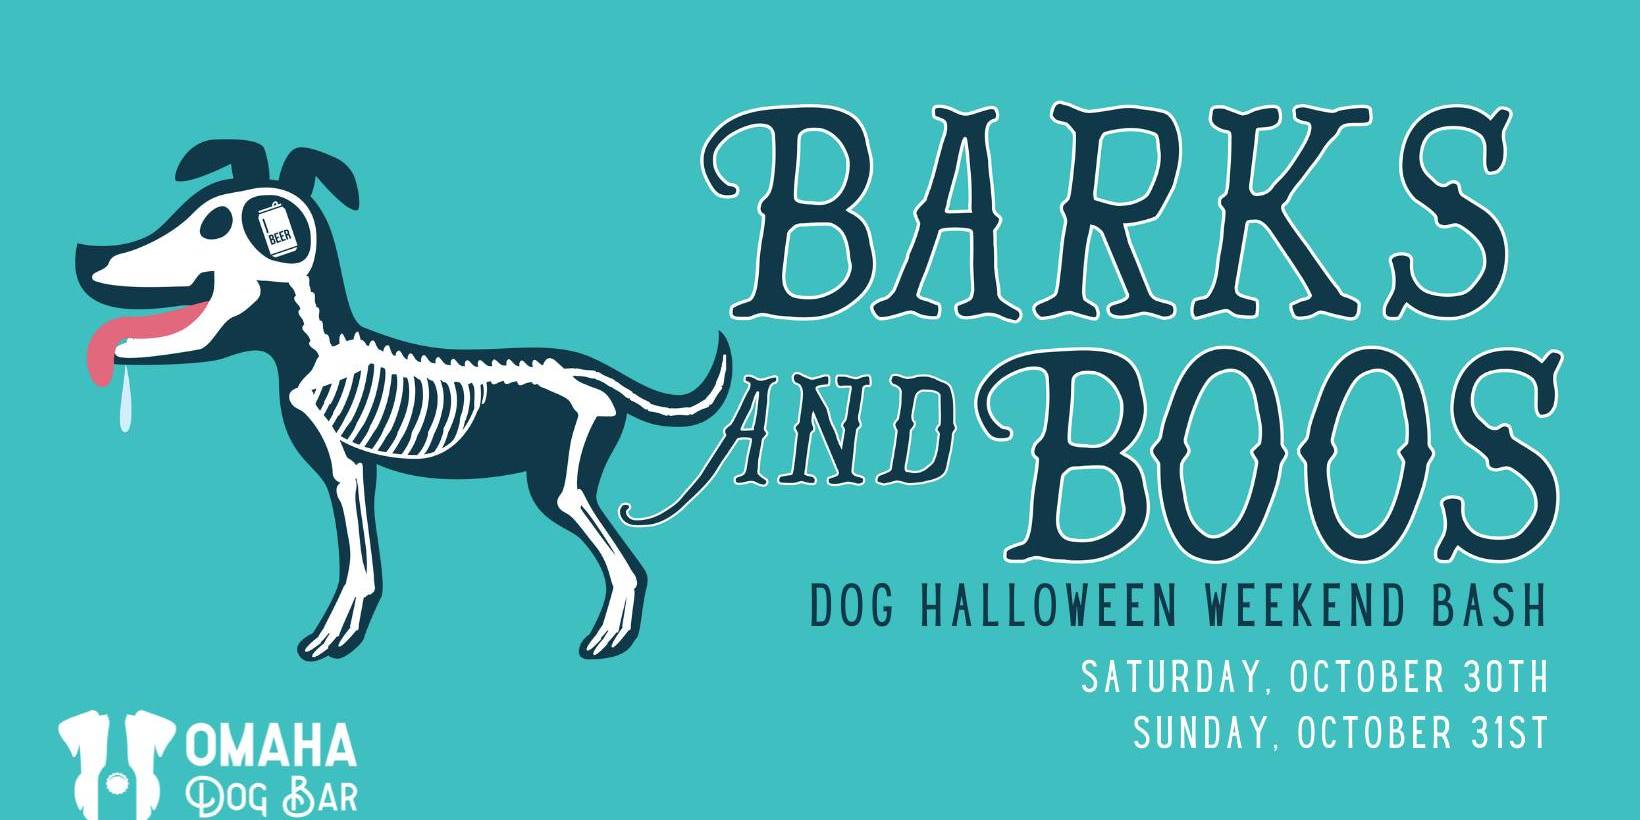 Barks and Boos - Halloween Weekend Bash! promotional image